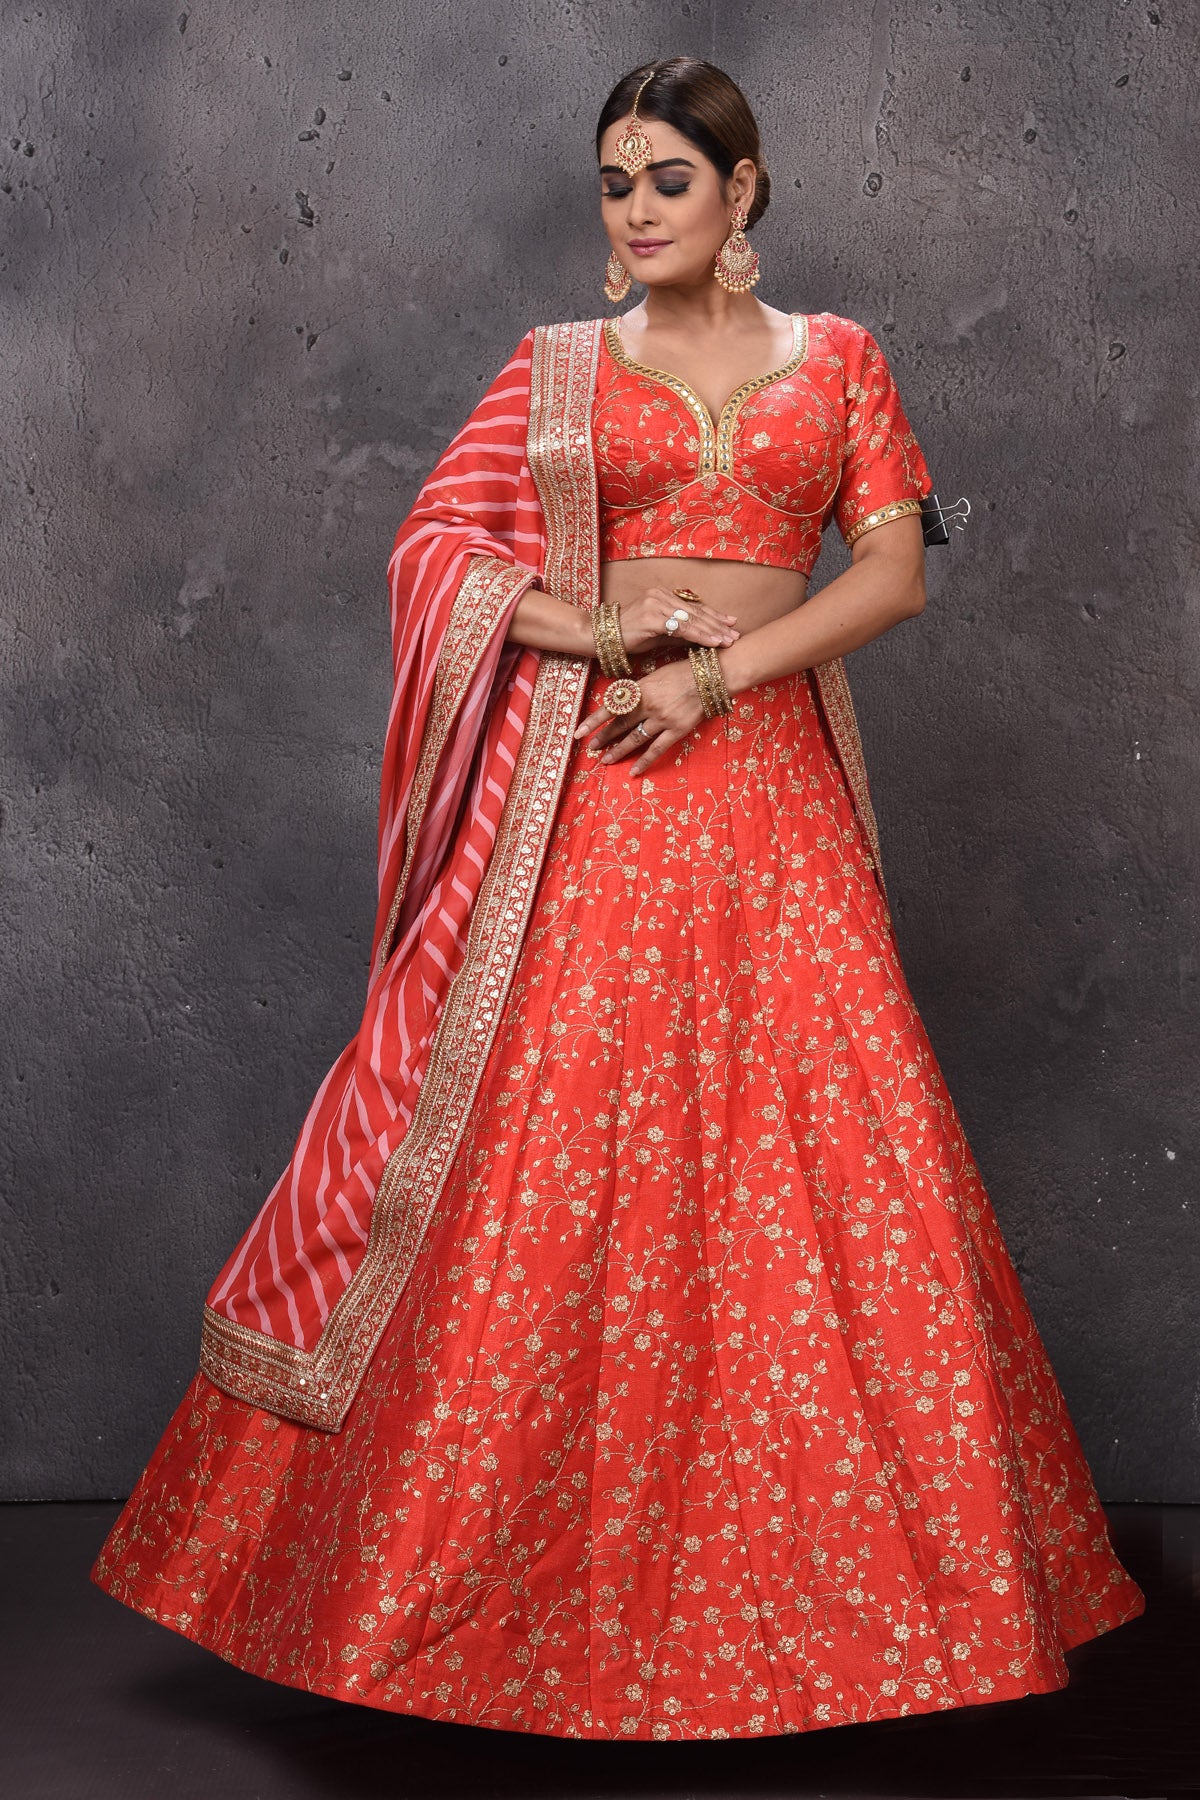 Buy beautiful orange embroidered designer lehenga with striped dupatta. Look royal at weddings in this bespoke designer lehengas, wedding gowns, bridal lehengas, designer sarees, Anarkali suits, sharara suits, from Pure Elegance Indian fashion store in USA.-full view